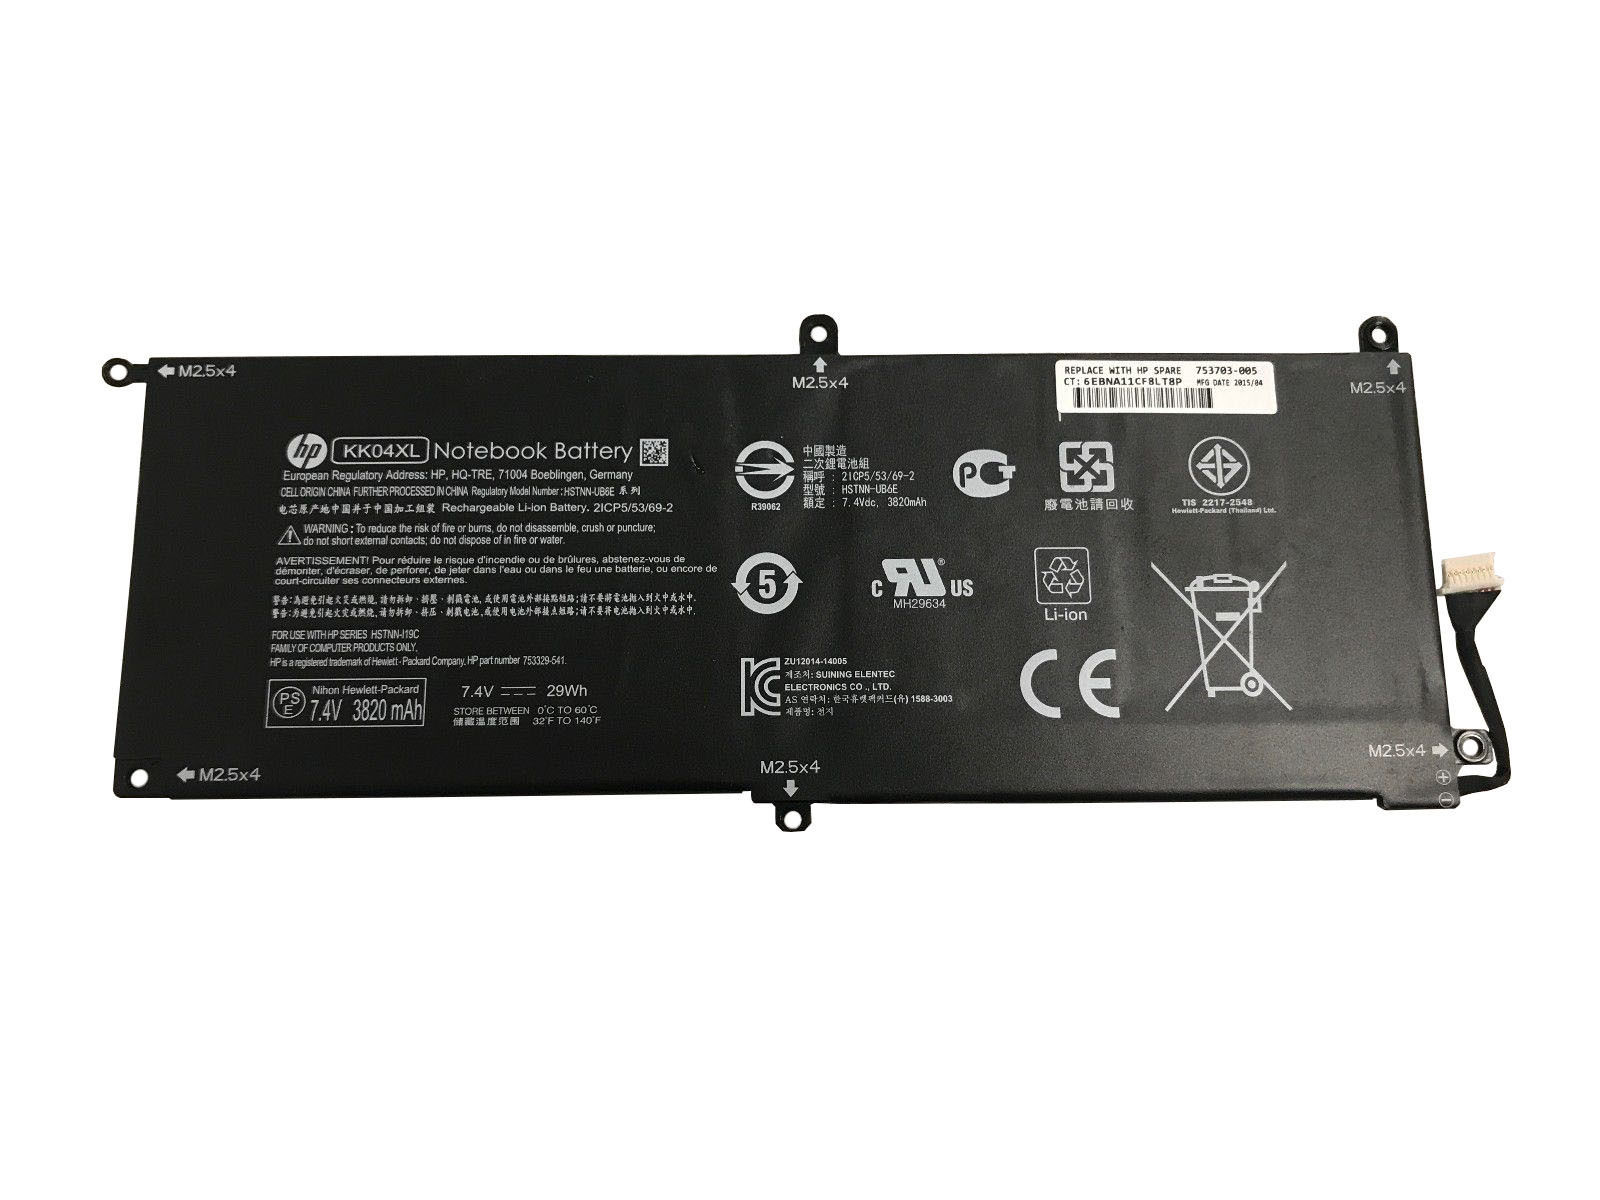 Primary image for HSTNN-I19C HP Pro X2 612 G1 Battery K4K09LT L5G68EA P7H18UC W2G01UC Z6H57UC